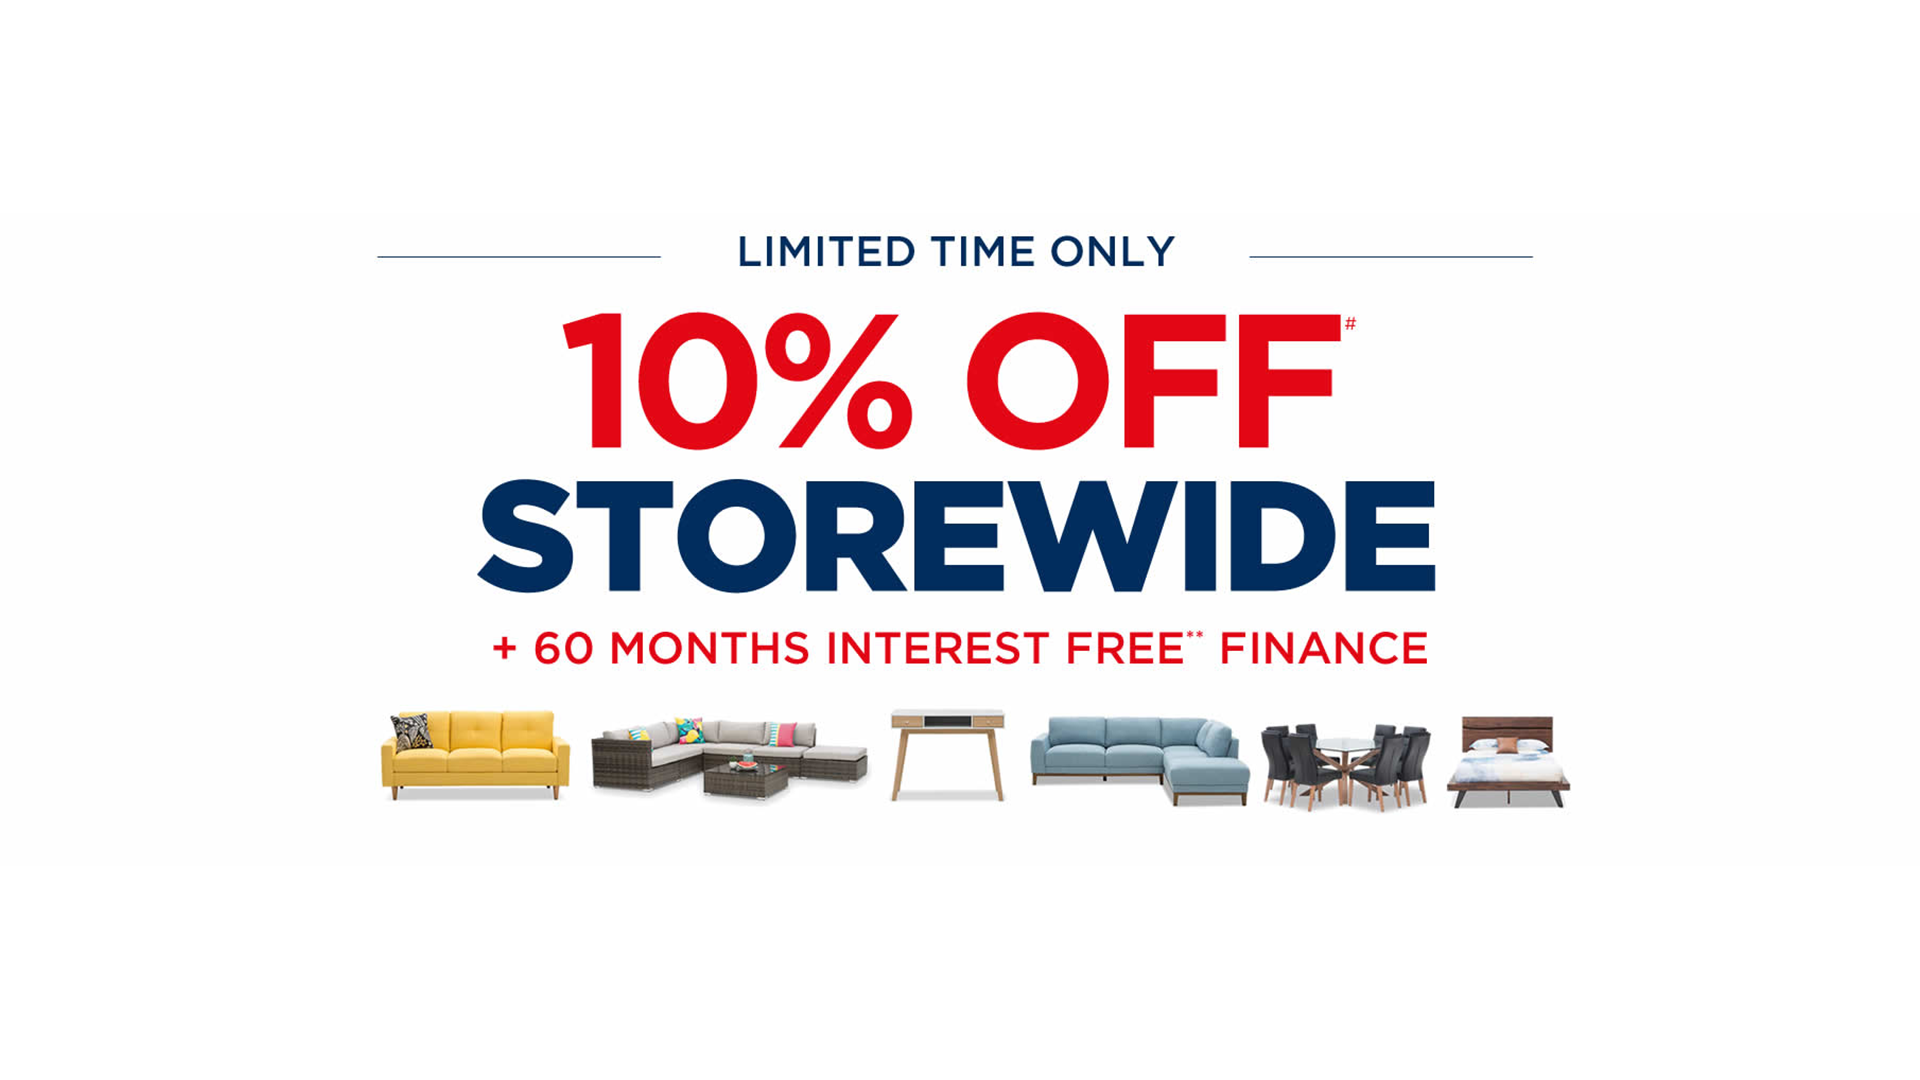 Extra 10% OFF storewide with promo code at Amart Furniture